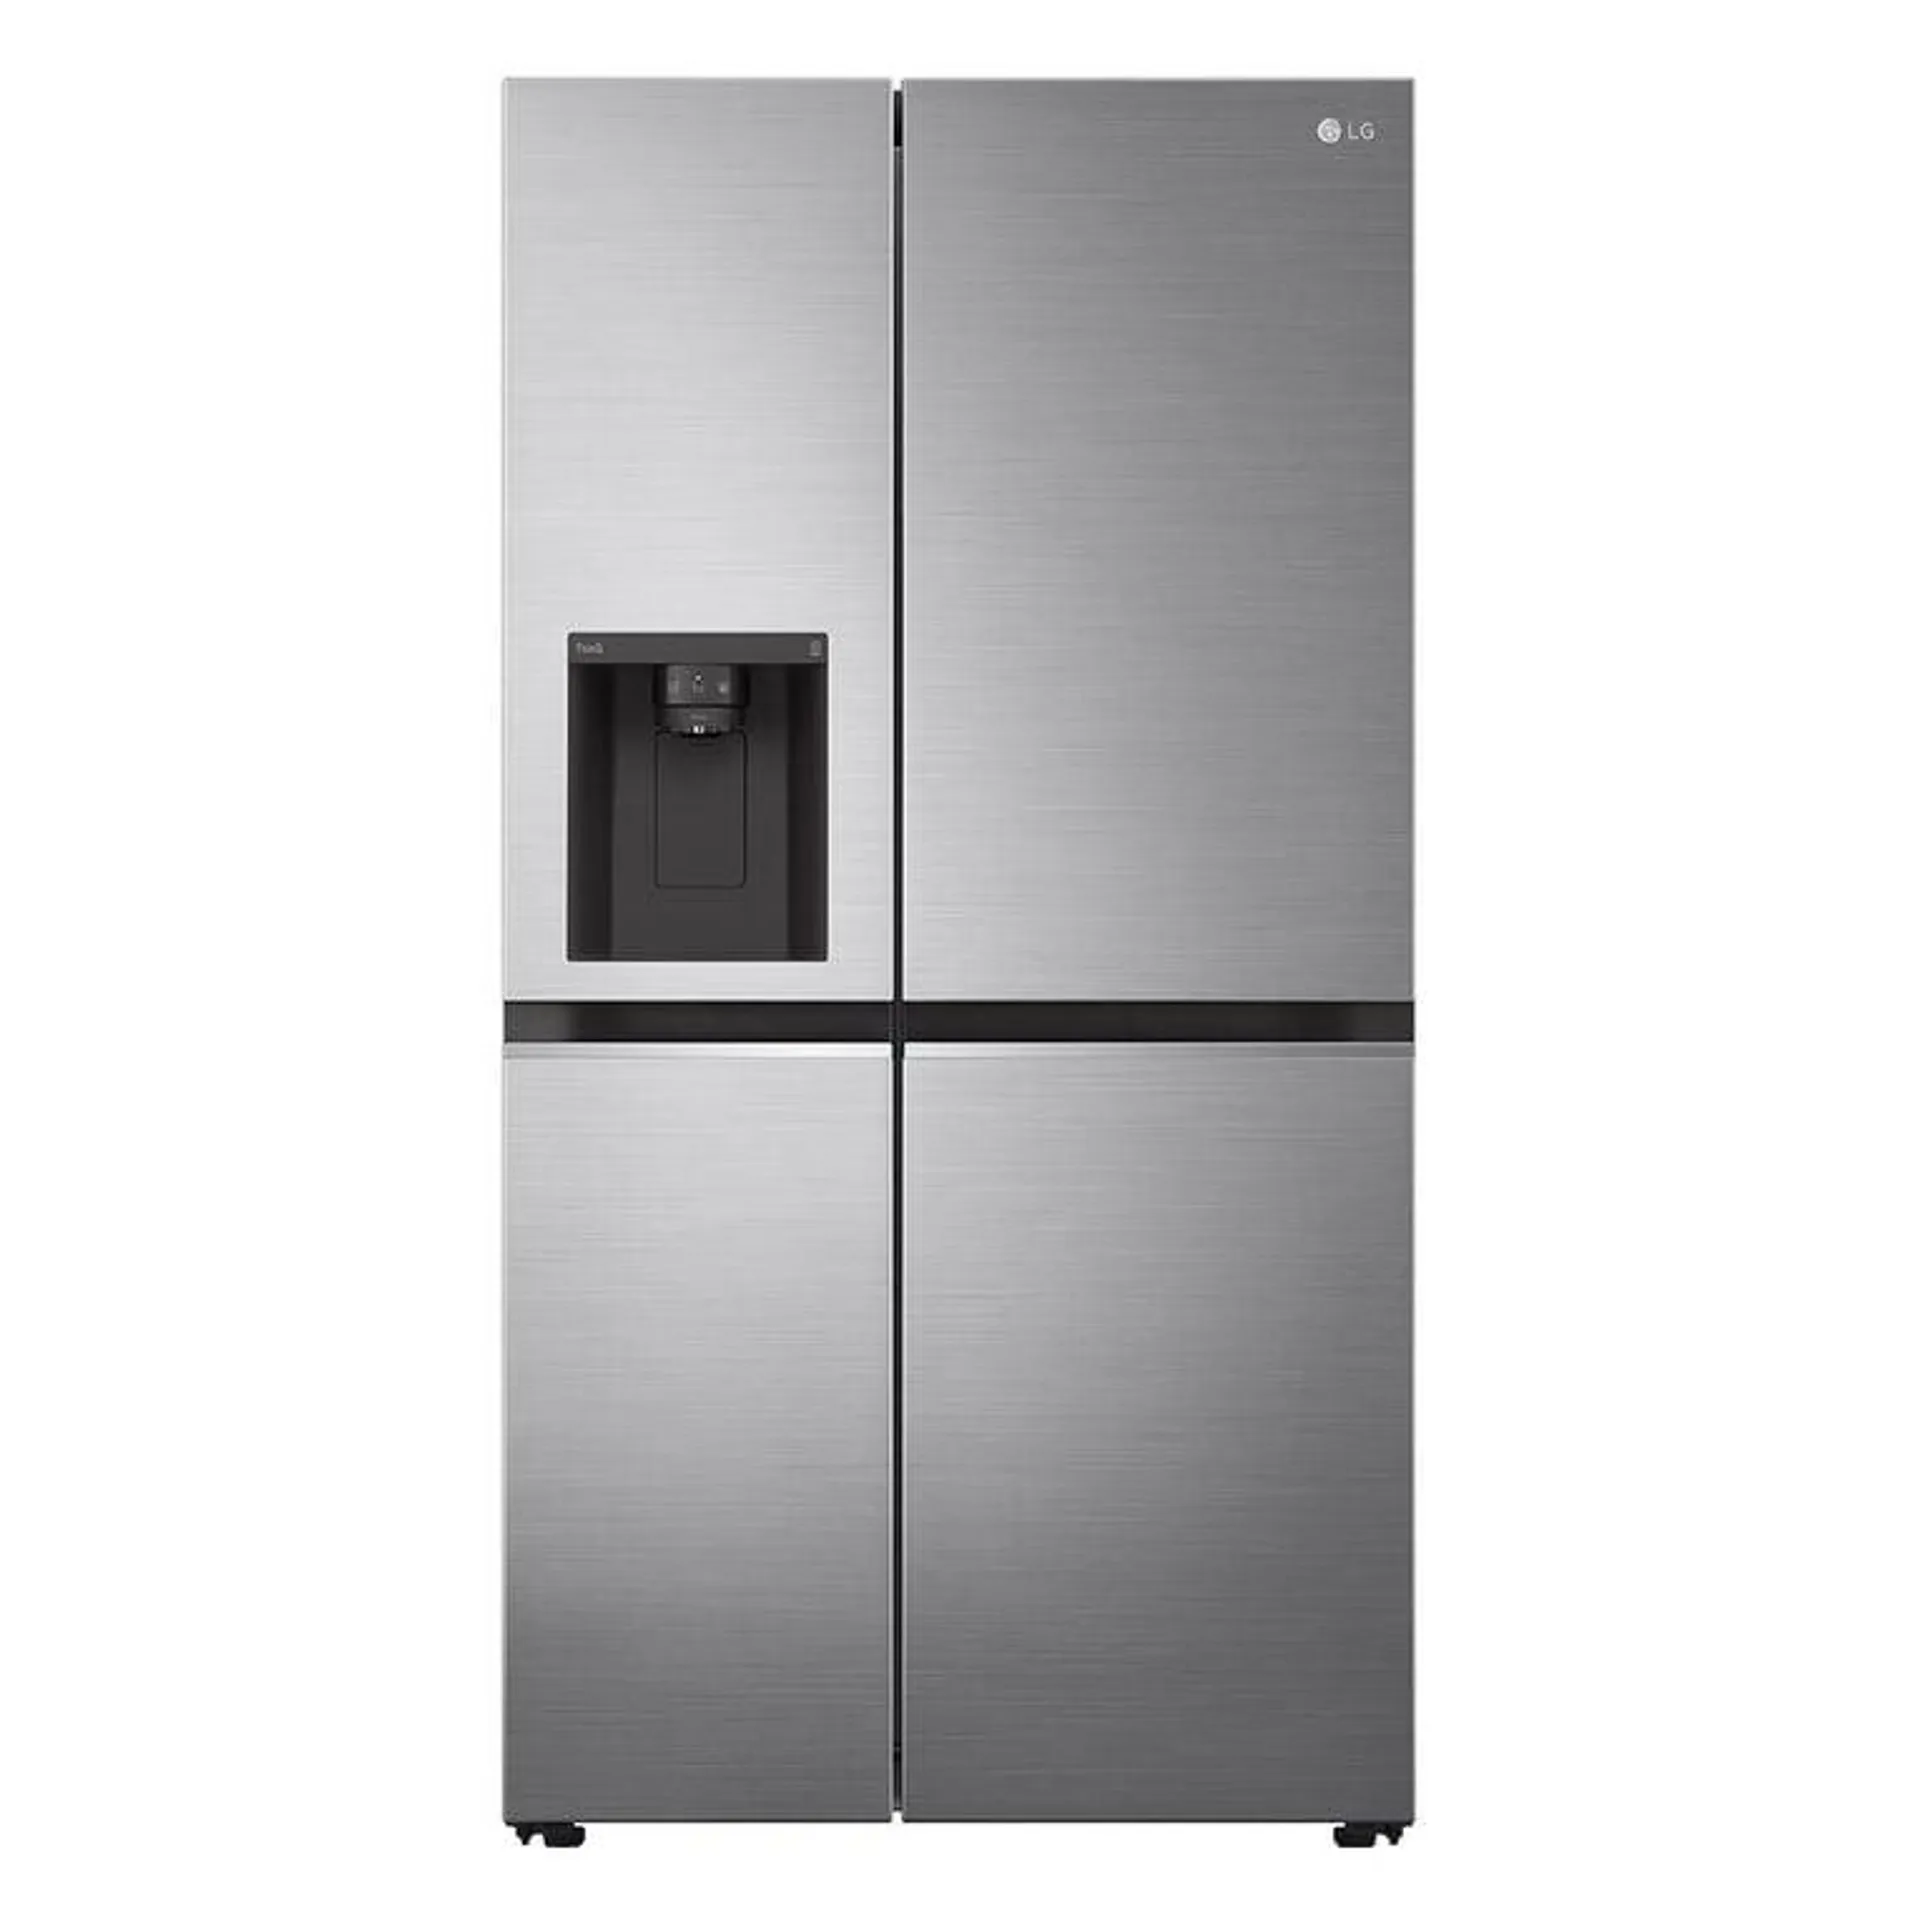 LG 635L Side By Side Fridge with Non Plumbed Ice & Water Dispenser in Stainless Finish